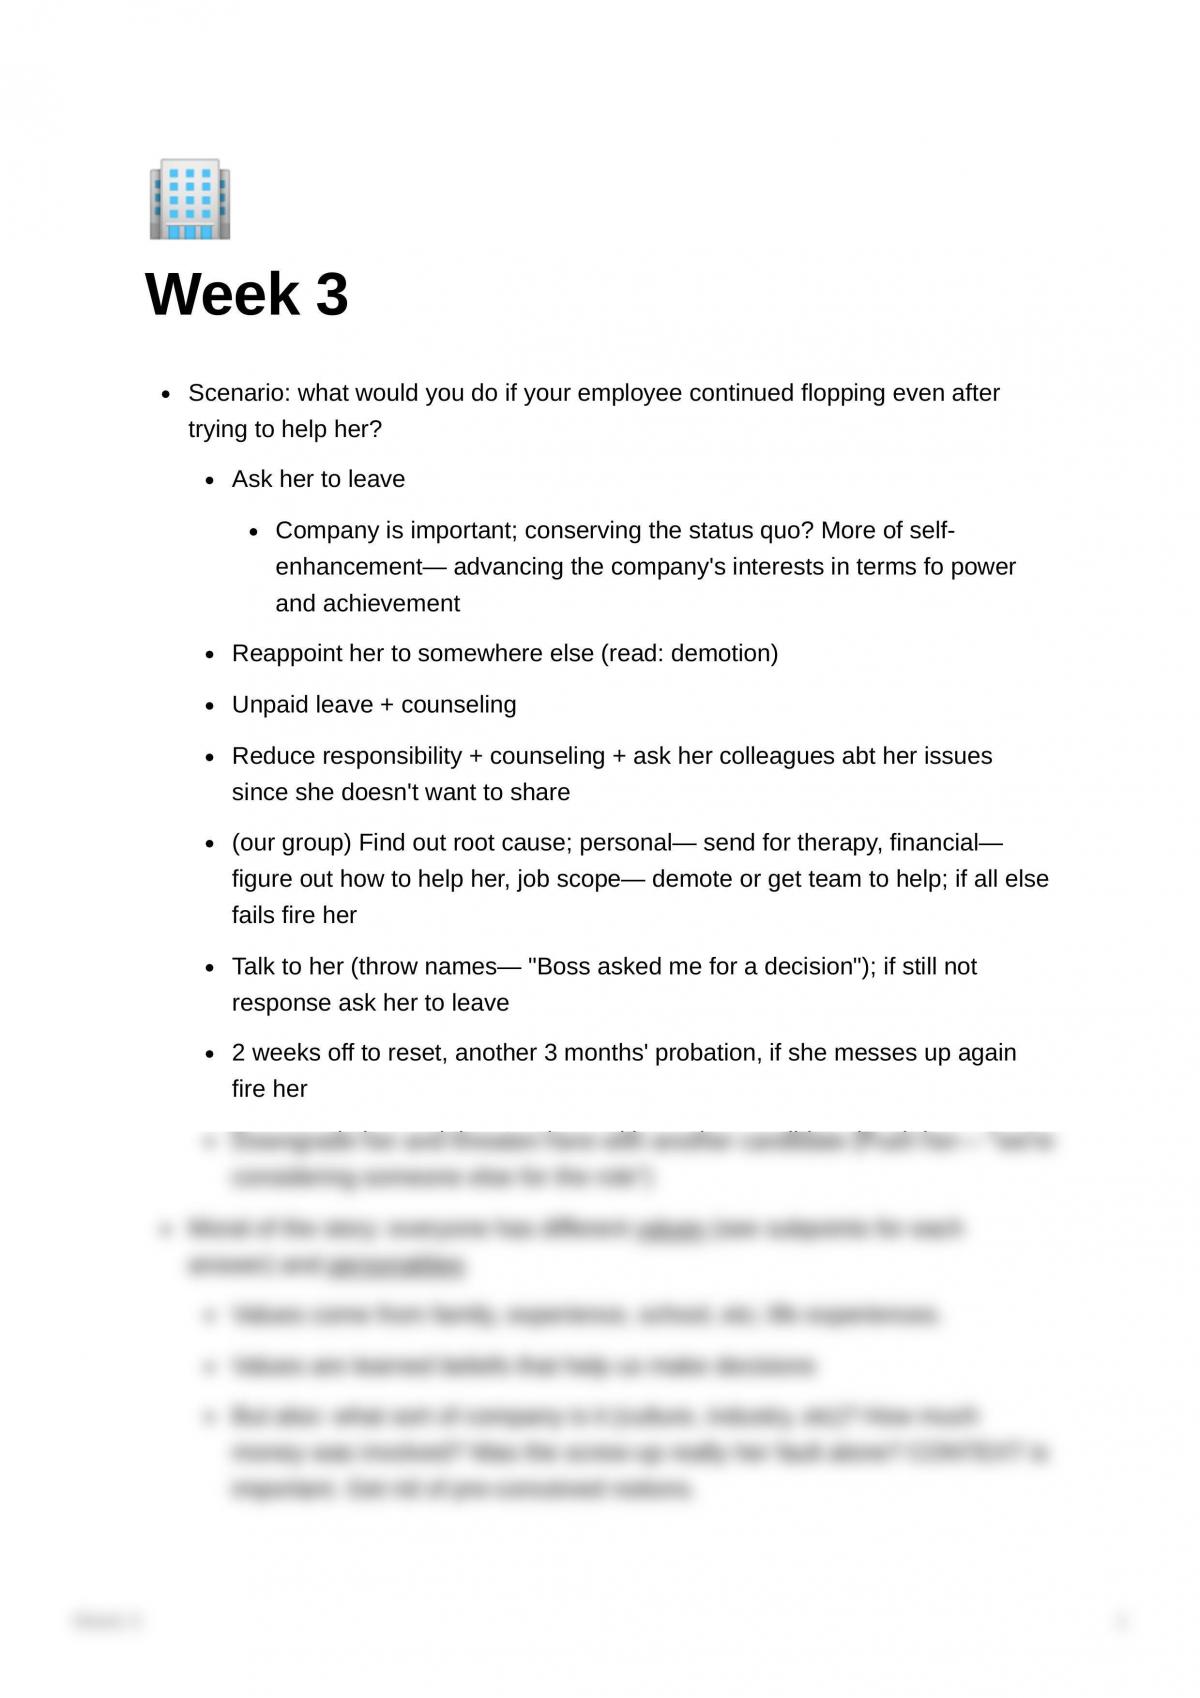 Week 3 Class Notes - Page 1